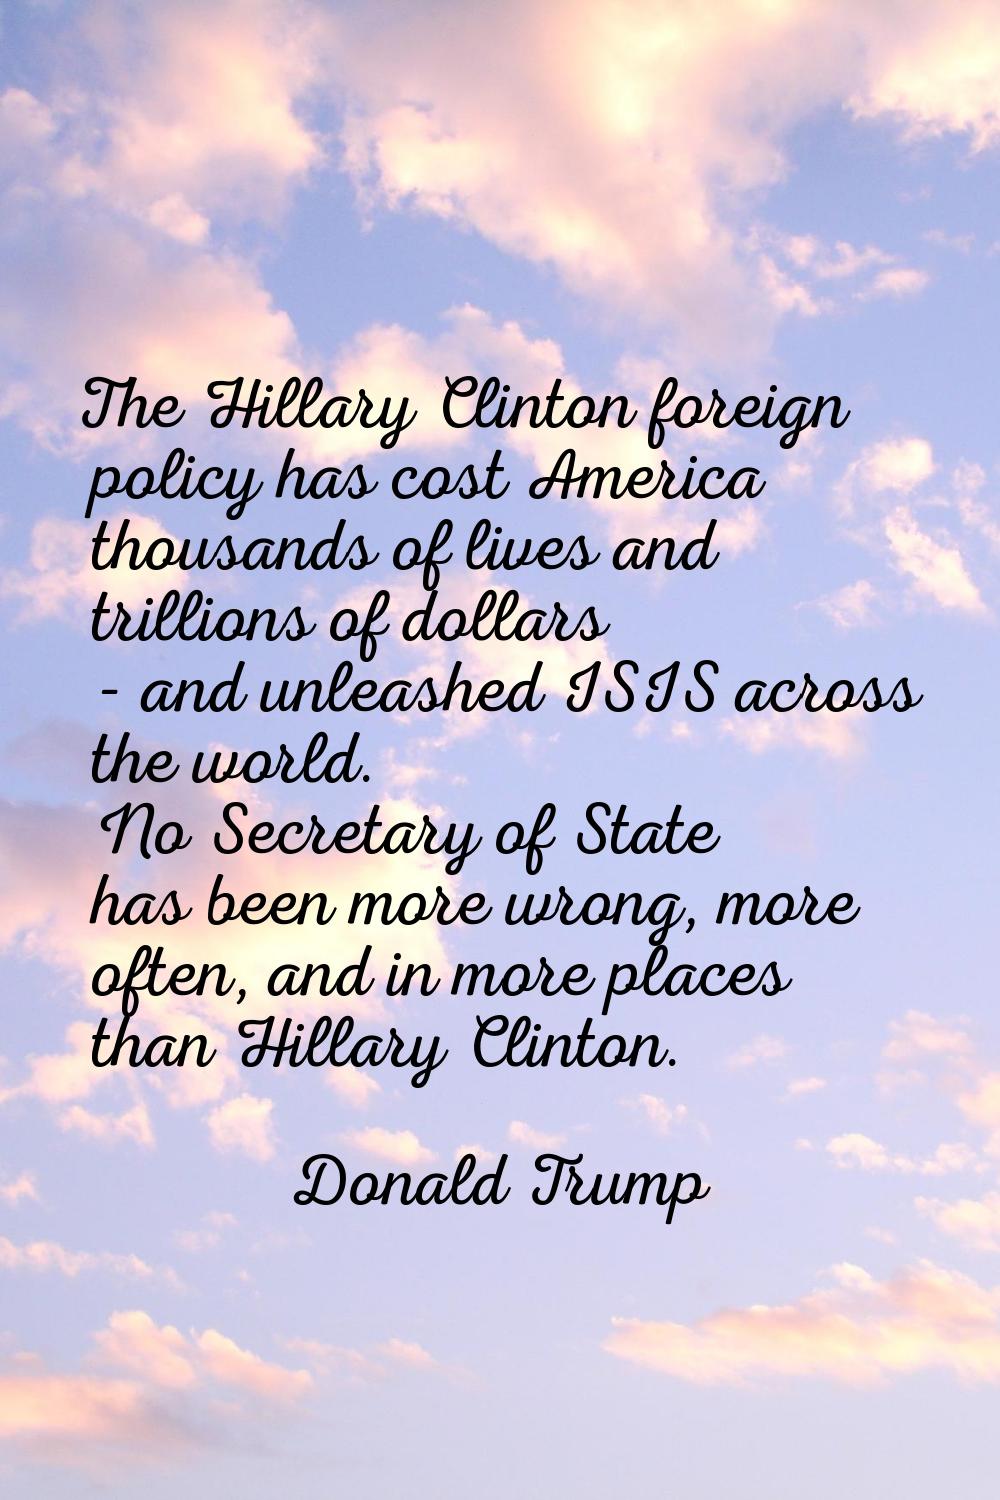 The Hillary Clinton foreign policy has cost America thousands of lives and trillions of dollars - a